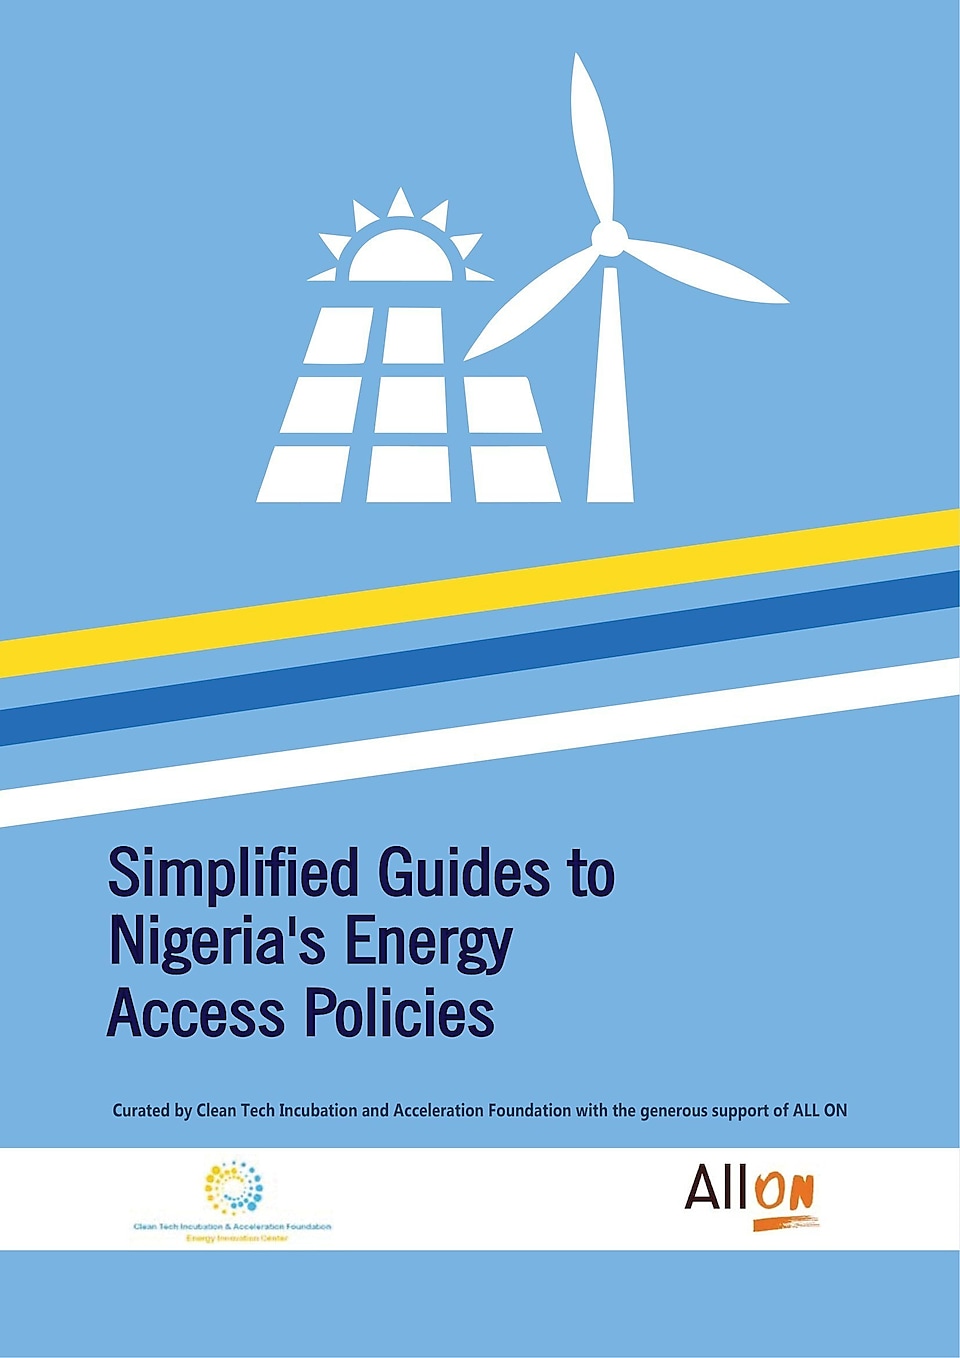 Simplified Guides to Nigeria's Energy Access Policies